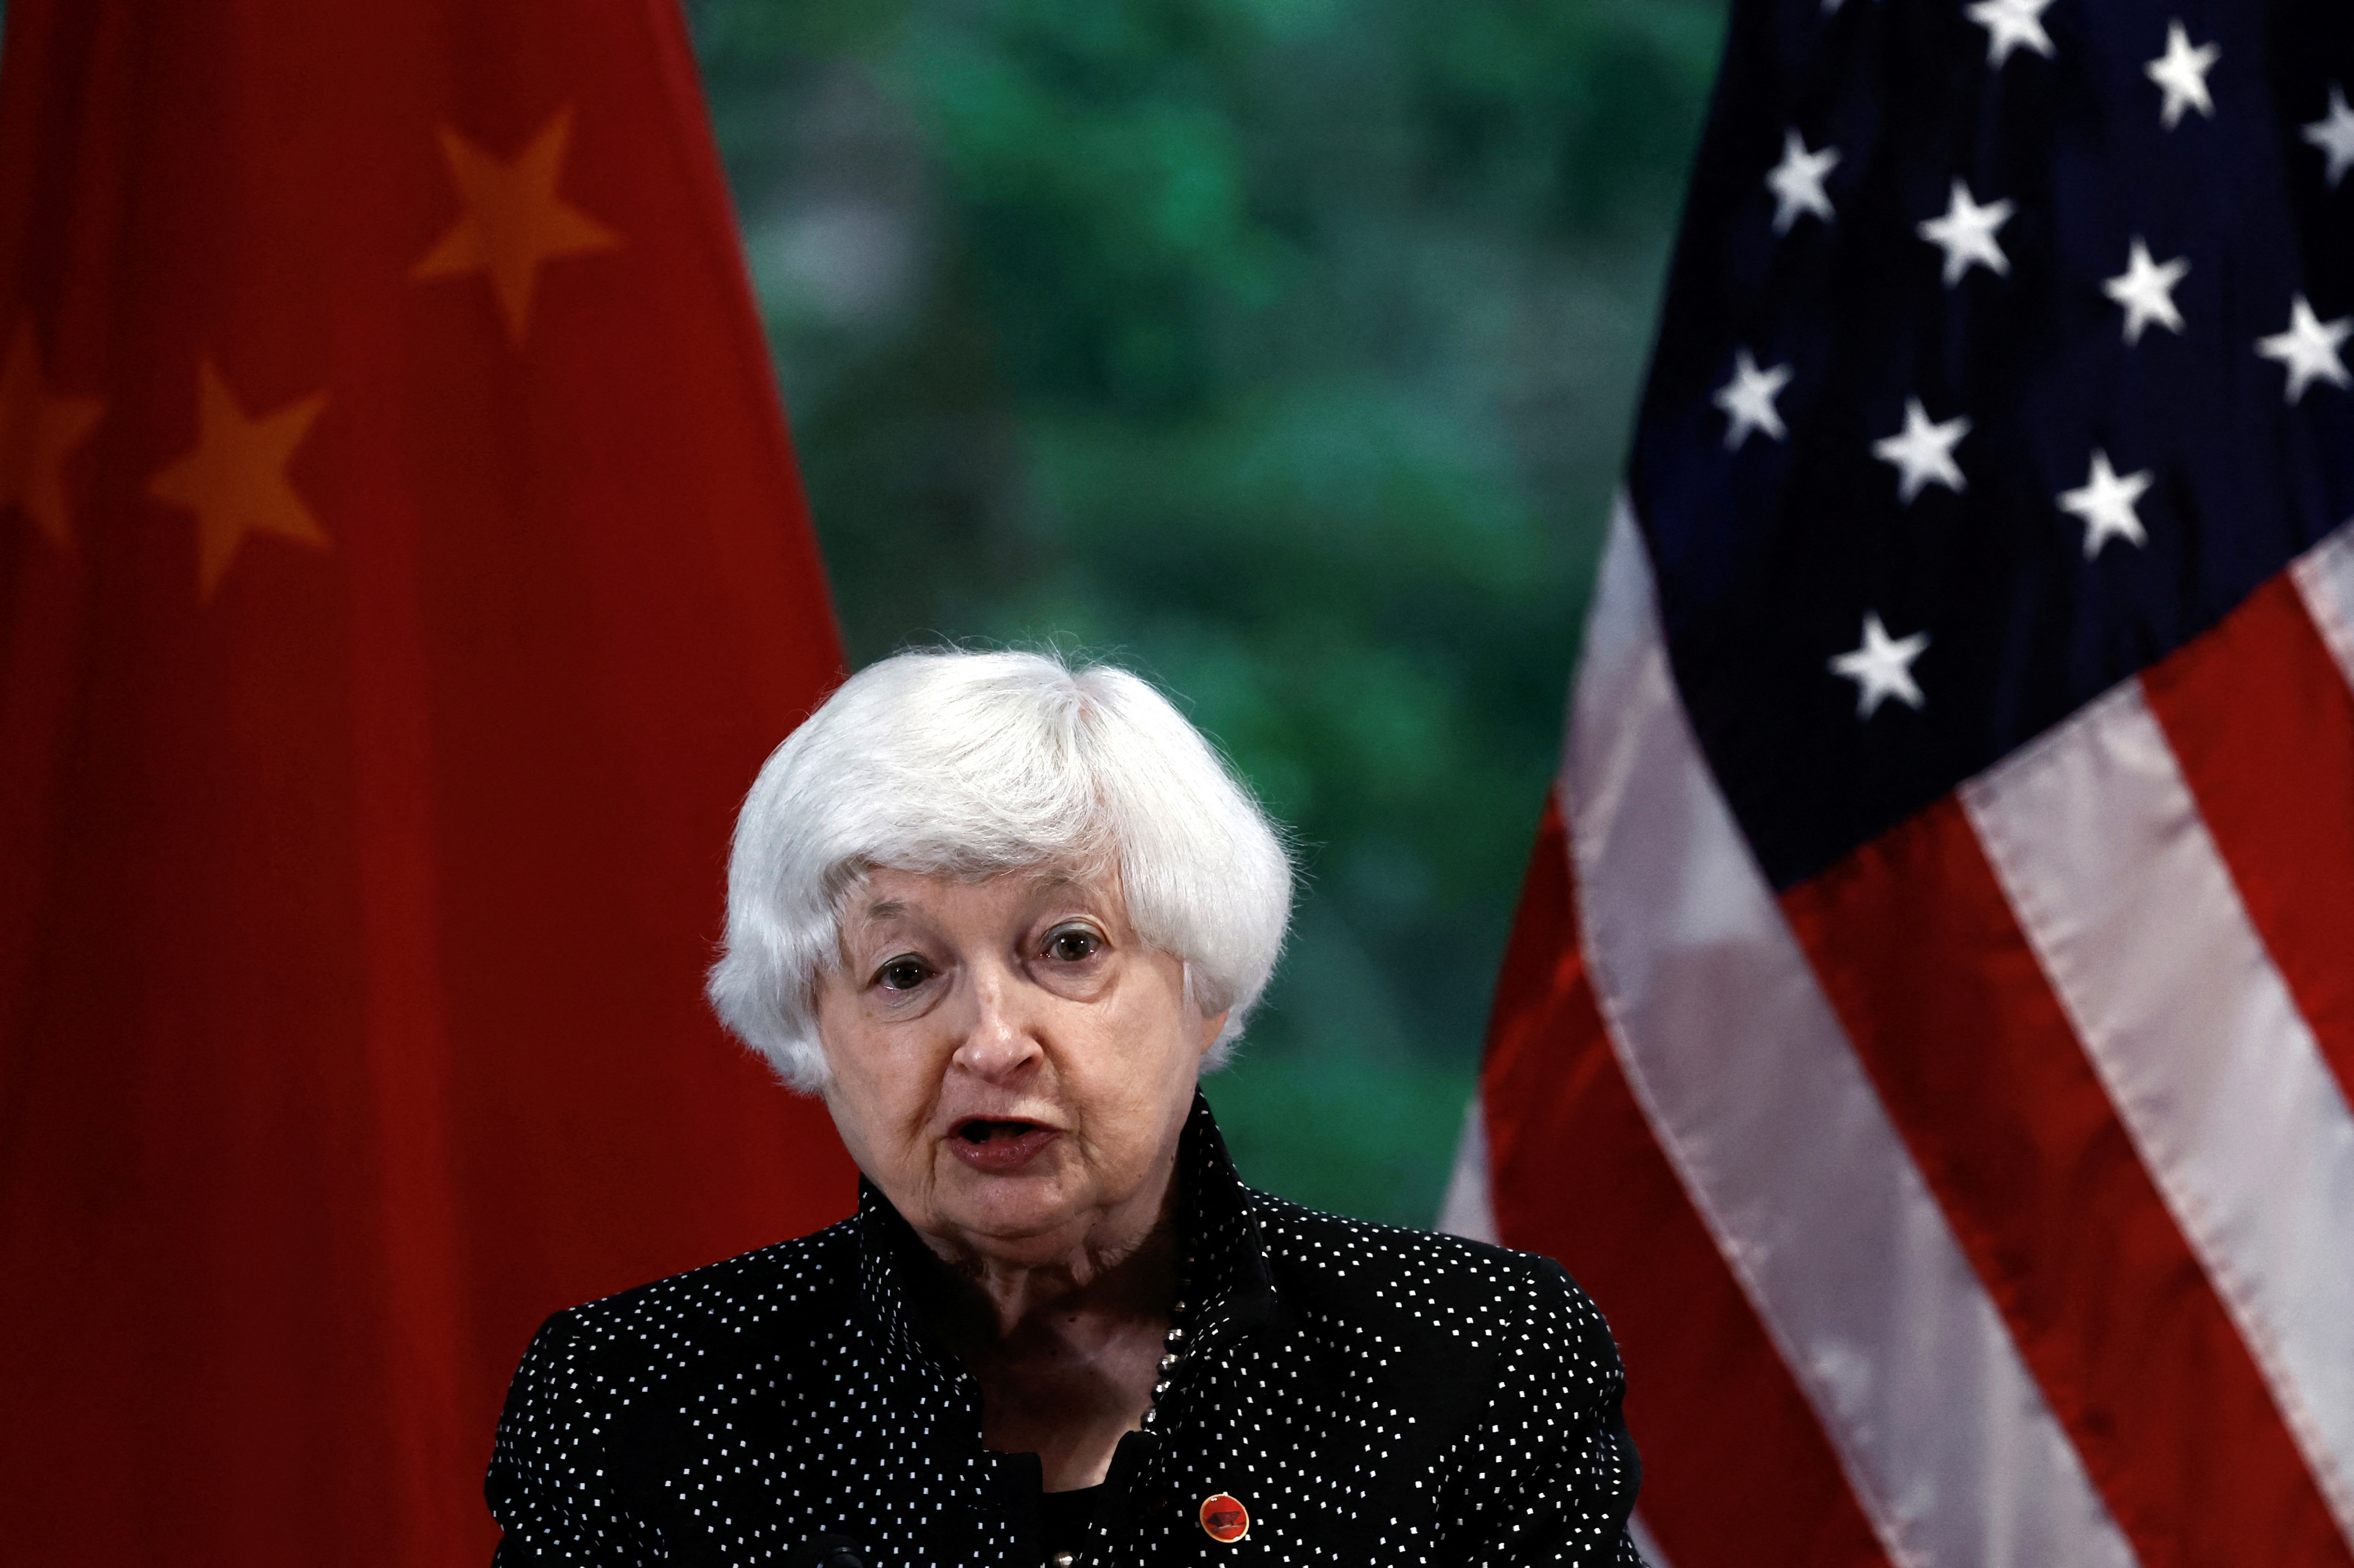 U.S. Treasury Secretary Janet Yellen speaks during an event by the American Chamber of Commerce in China (AmCham China) in Guangzhou